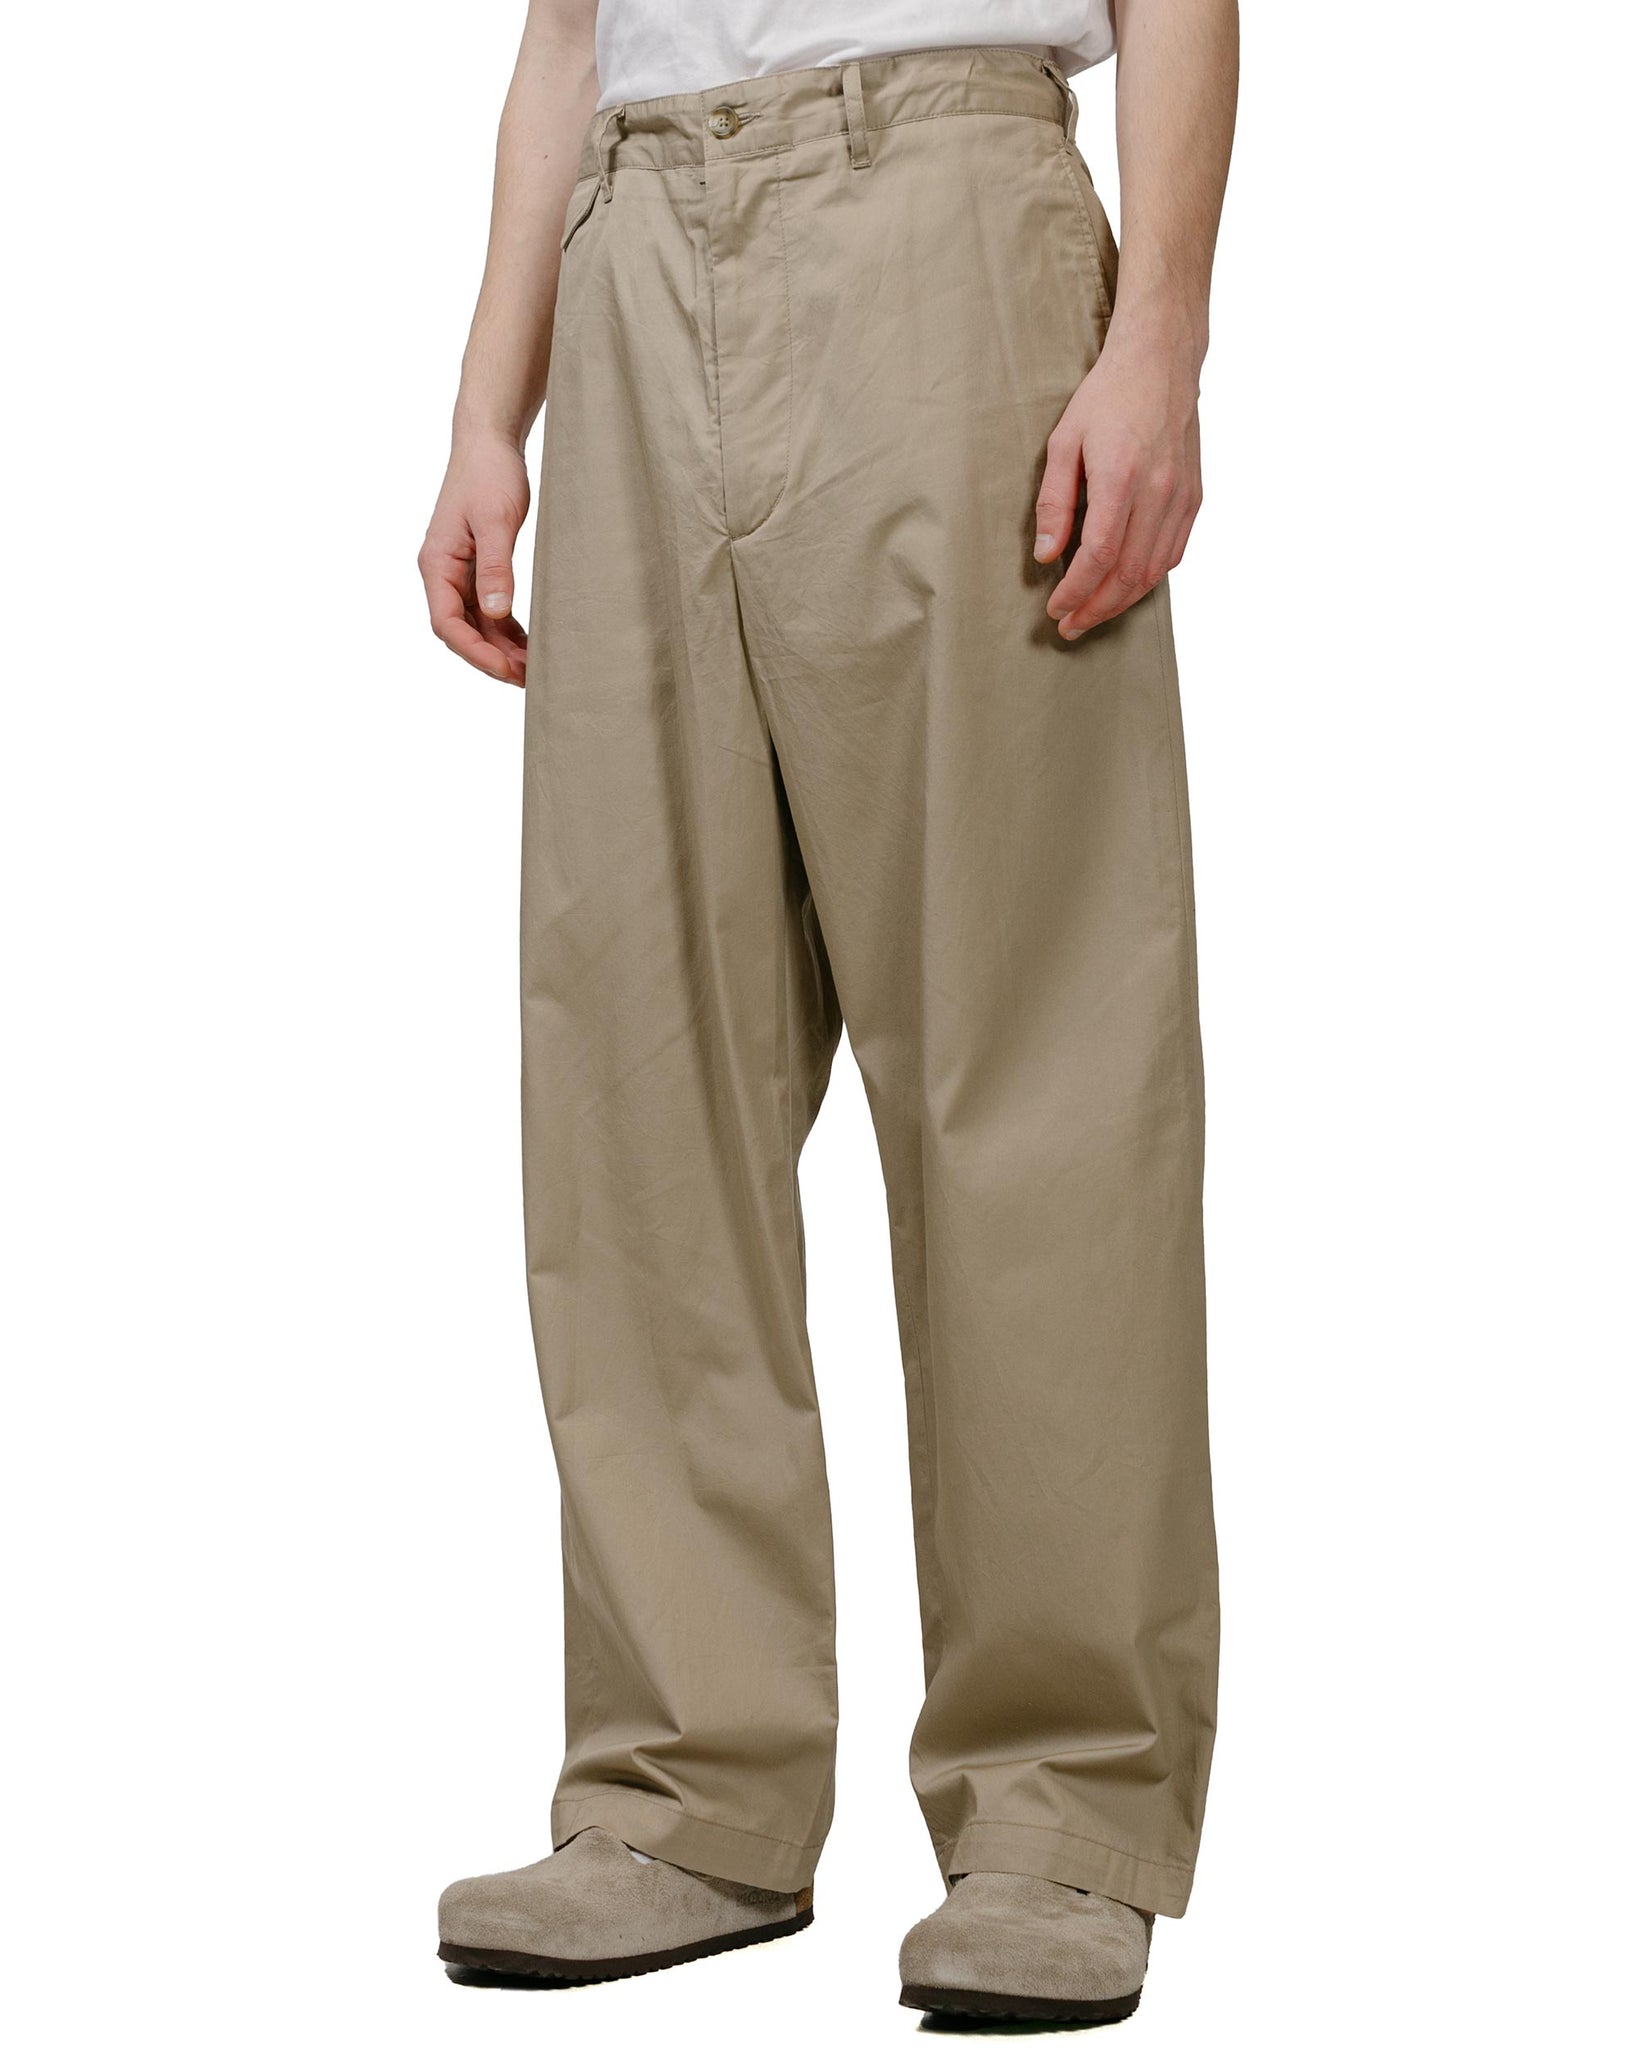 Engineered Garments Officer Pant Khaki Highcount Twill model front